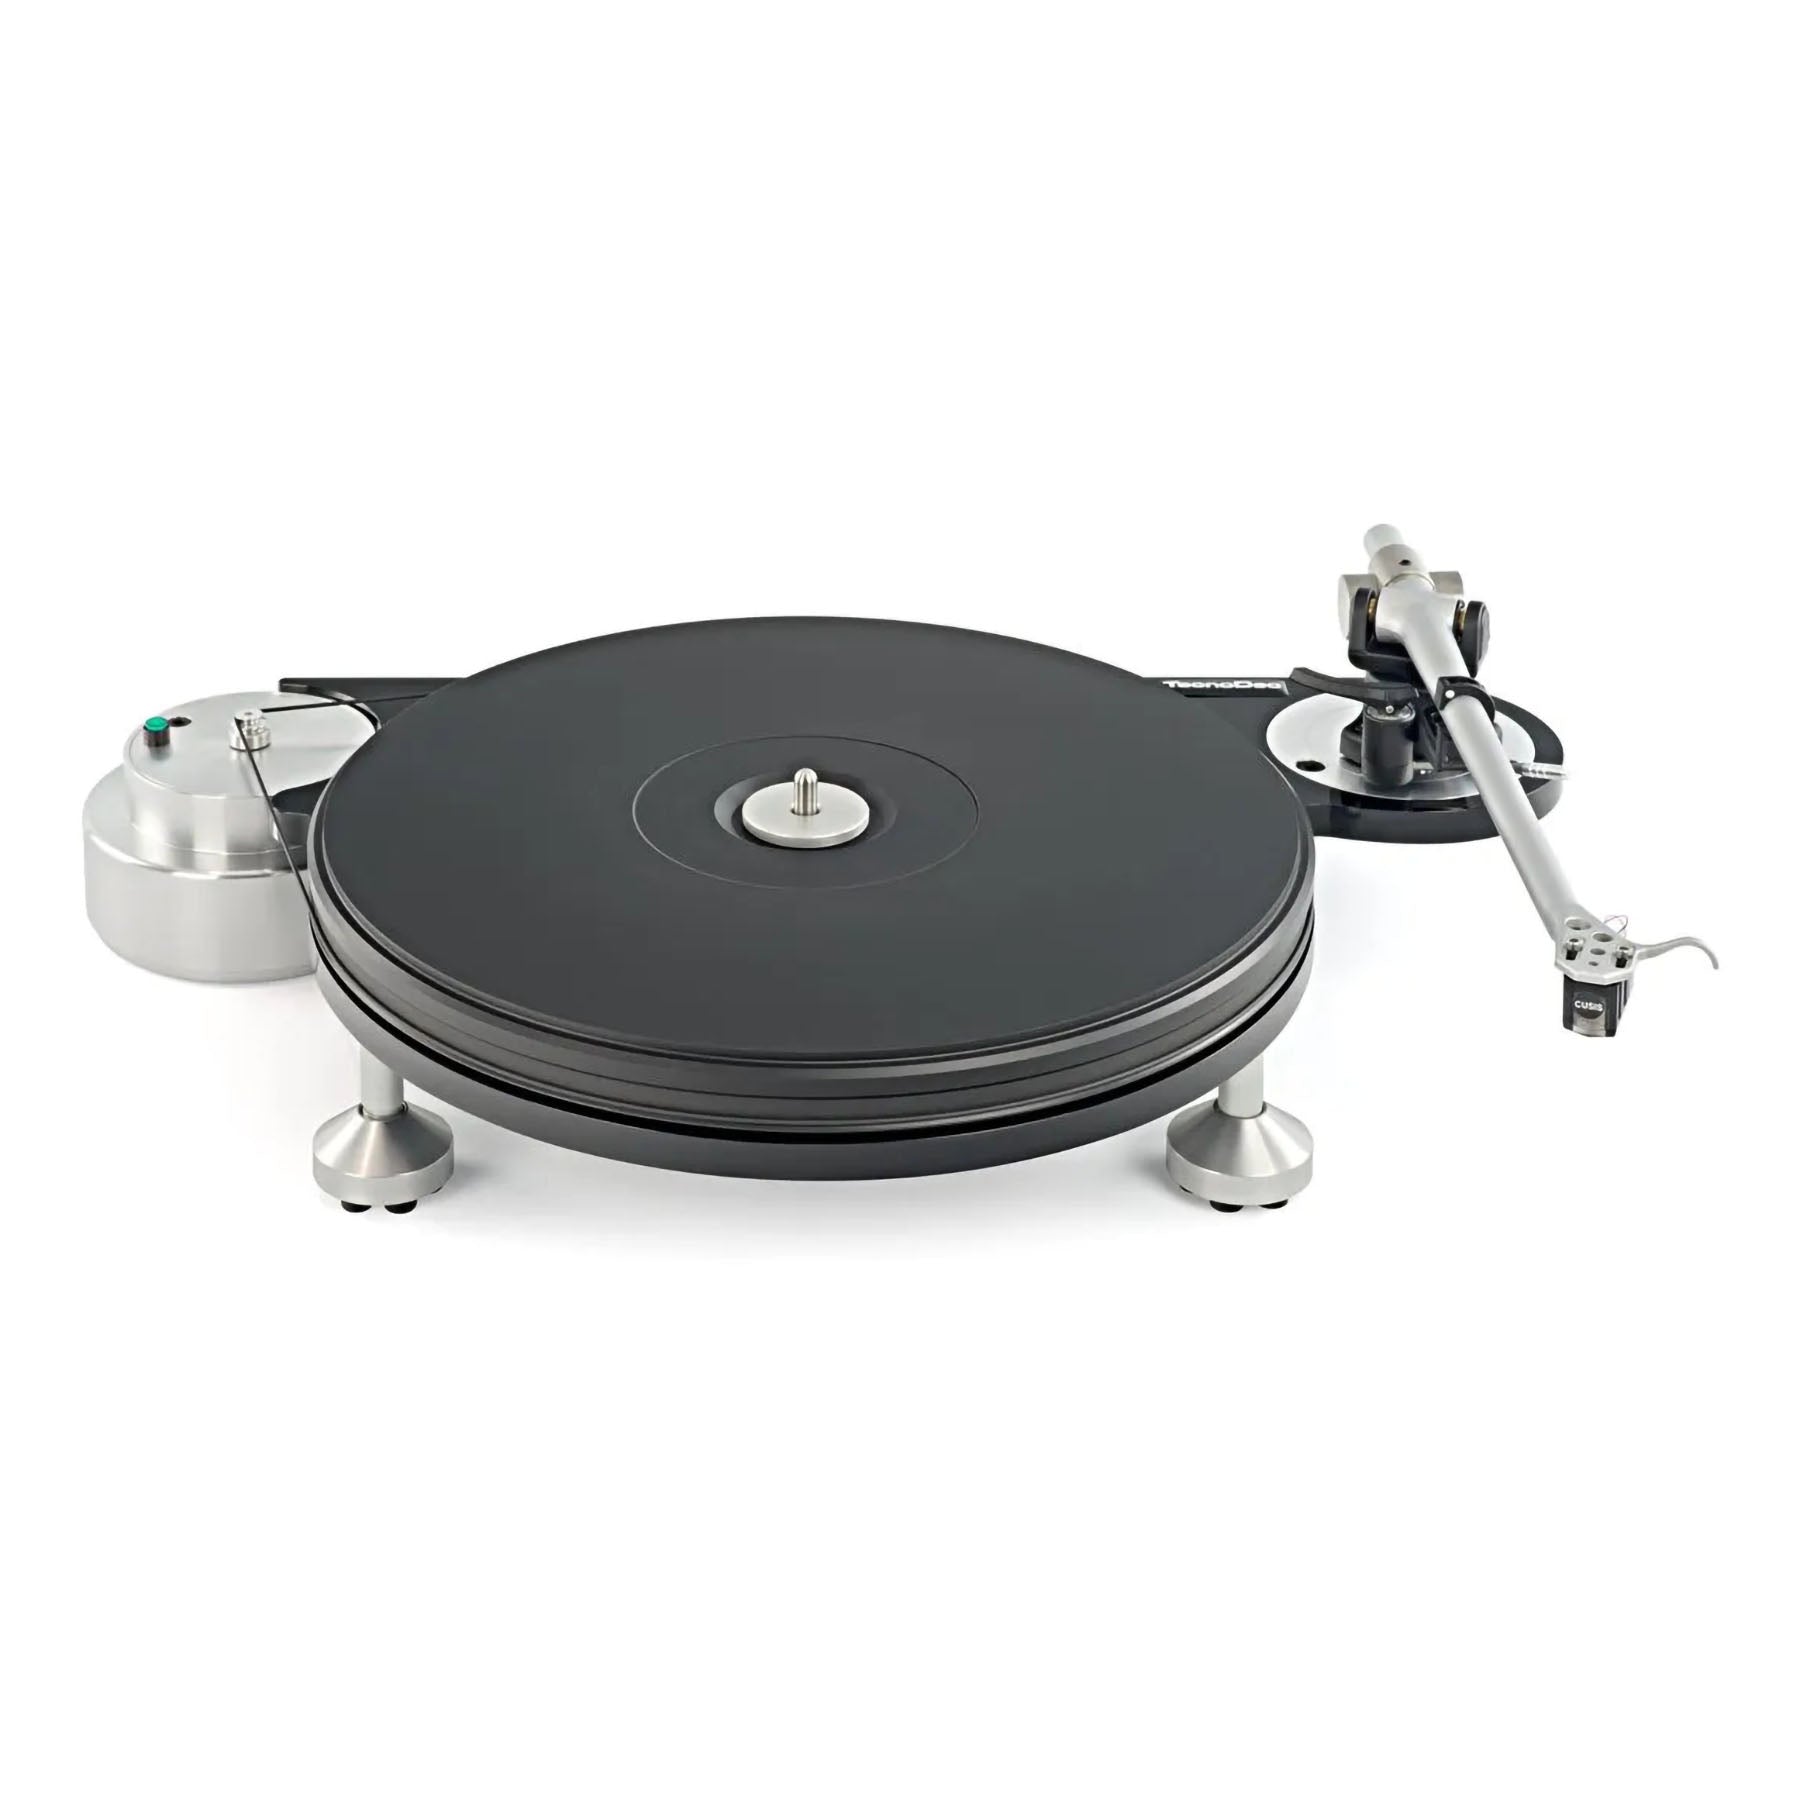 Michell TecnoDec Entry Level Reference Turntable